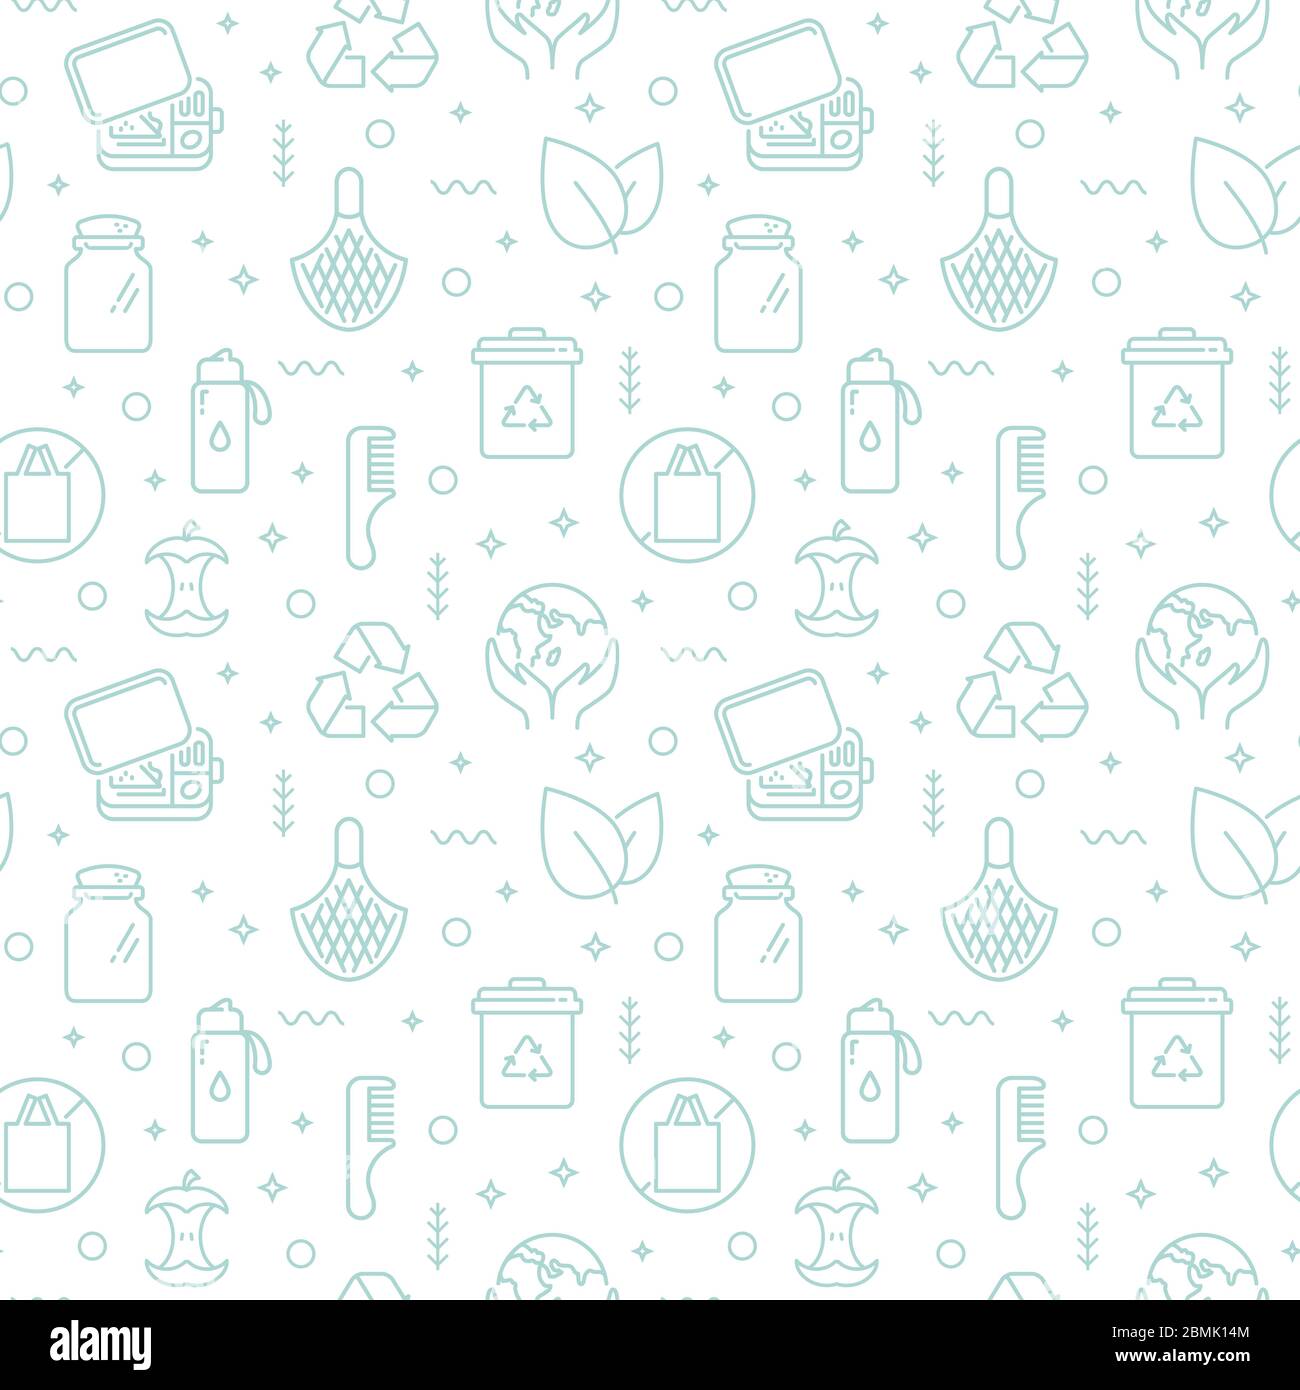 Zero waste seamless pattern. Pale vector background. Waste recycling, reusable items, eco lifestyle, caring for environment, saving the planet. Stock Vector